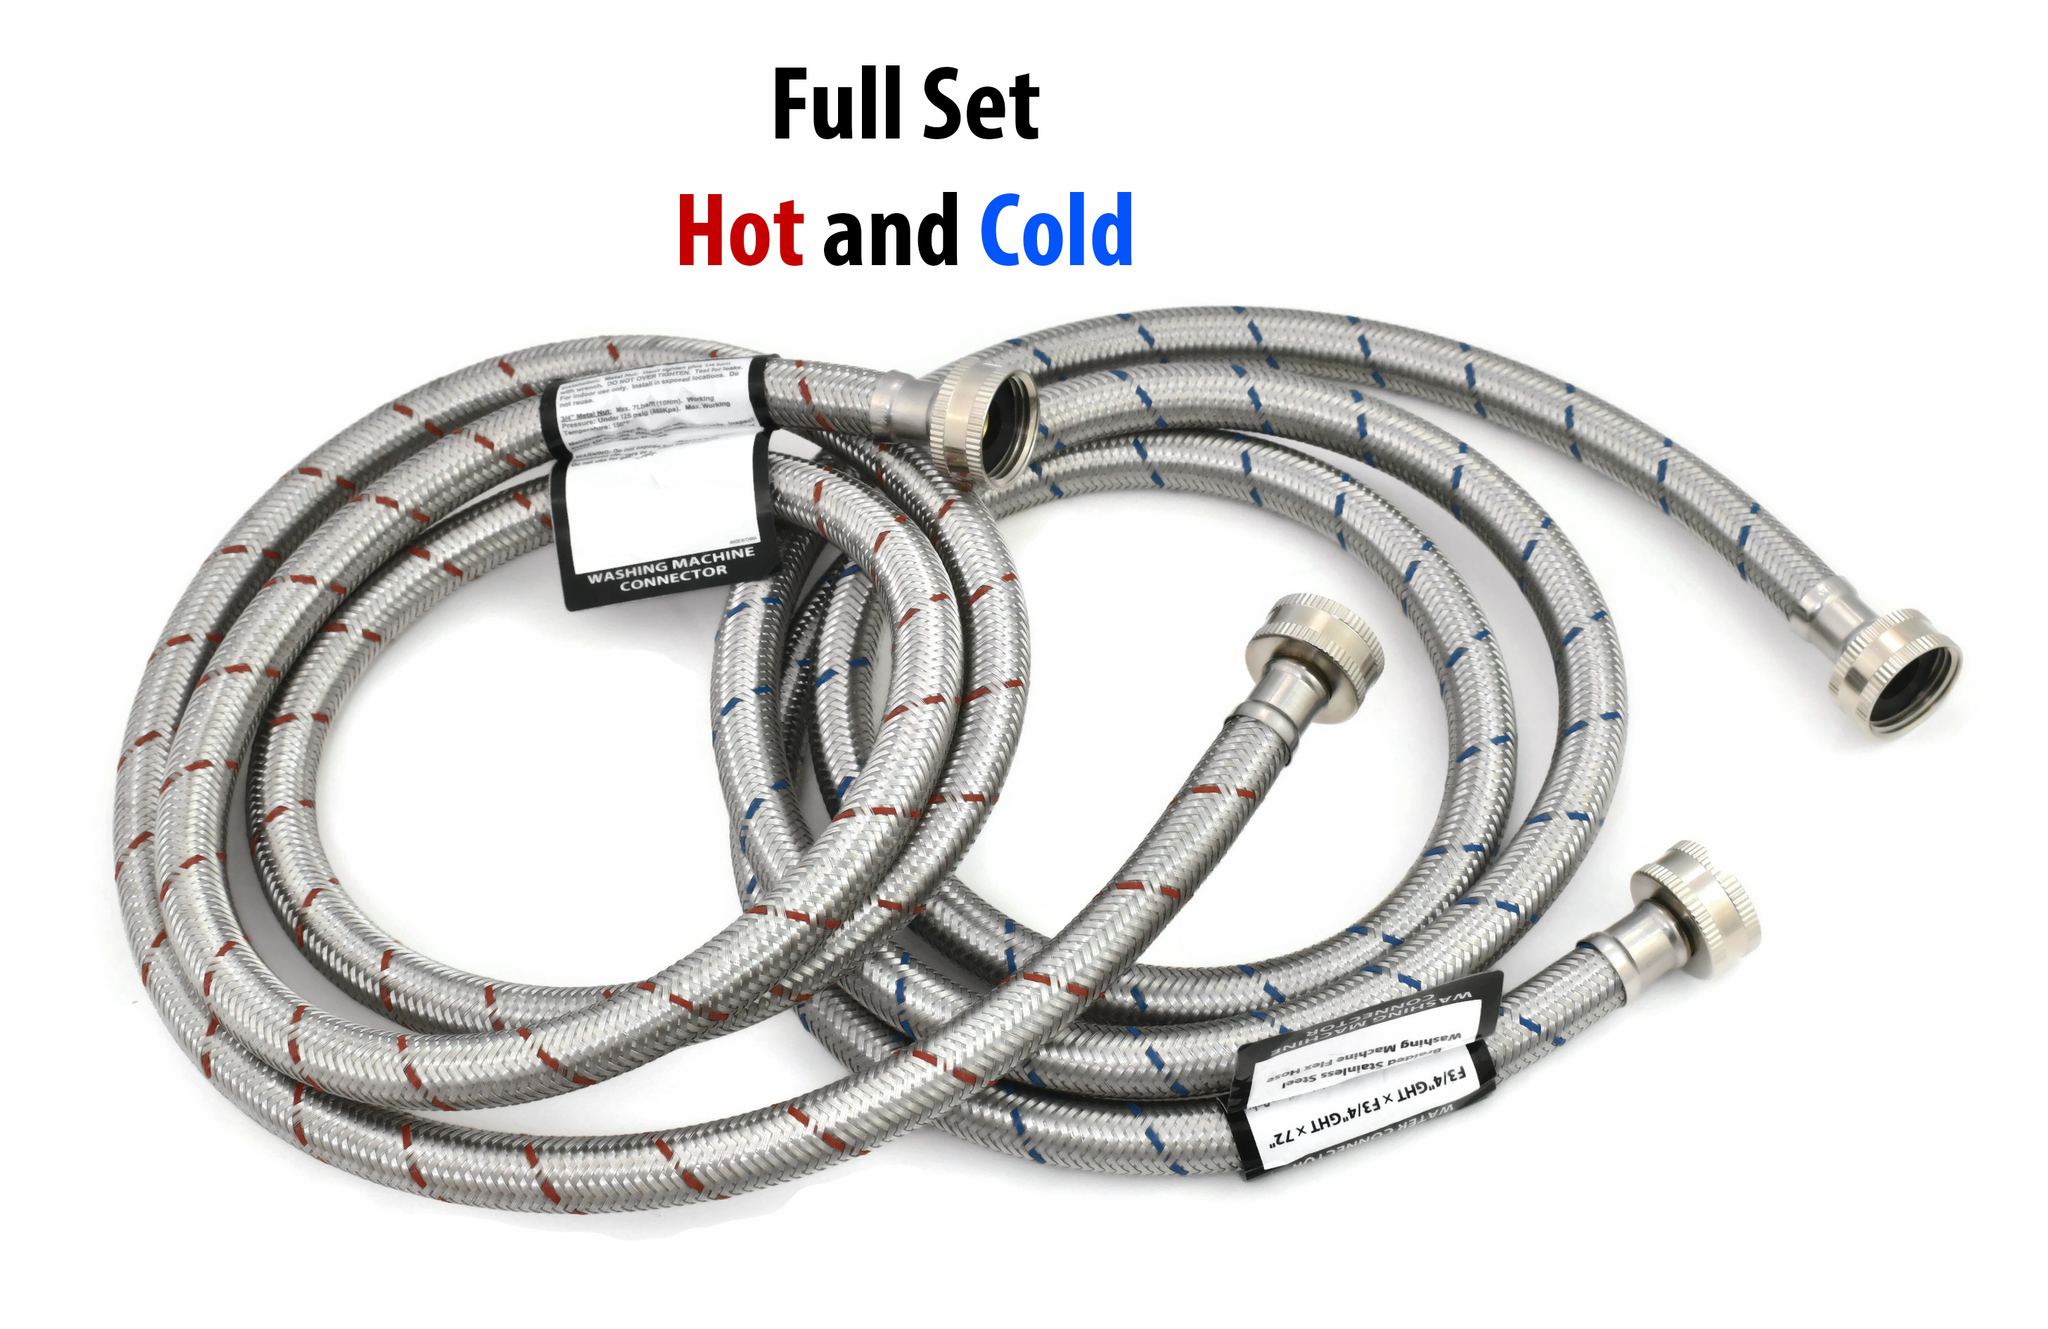 https://drqualityparts.com/cdn/shop/products/full-set-hot-and-cold-stainless-steel-washer-hose-line-hot-cold-6-feet-_15_1024x1024@2x.png?v=1587606380